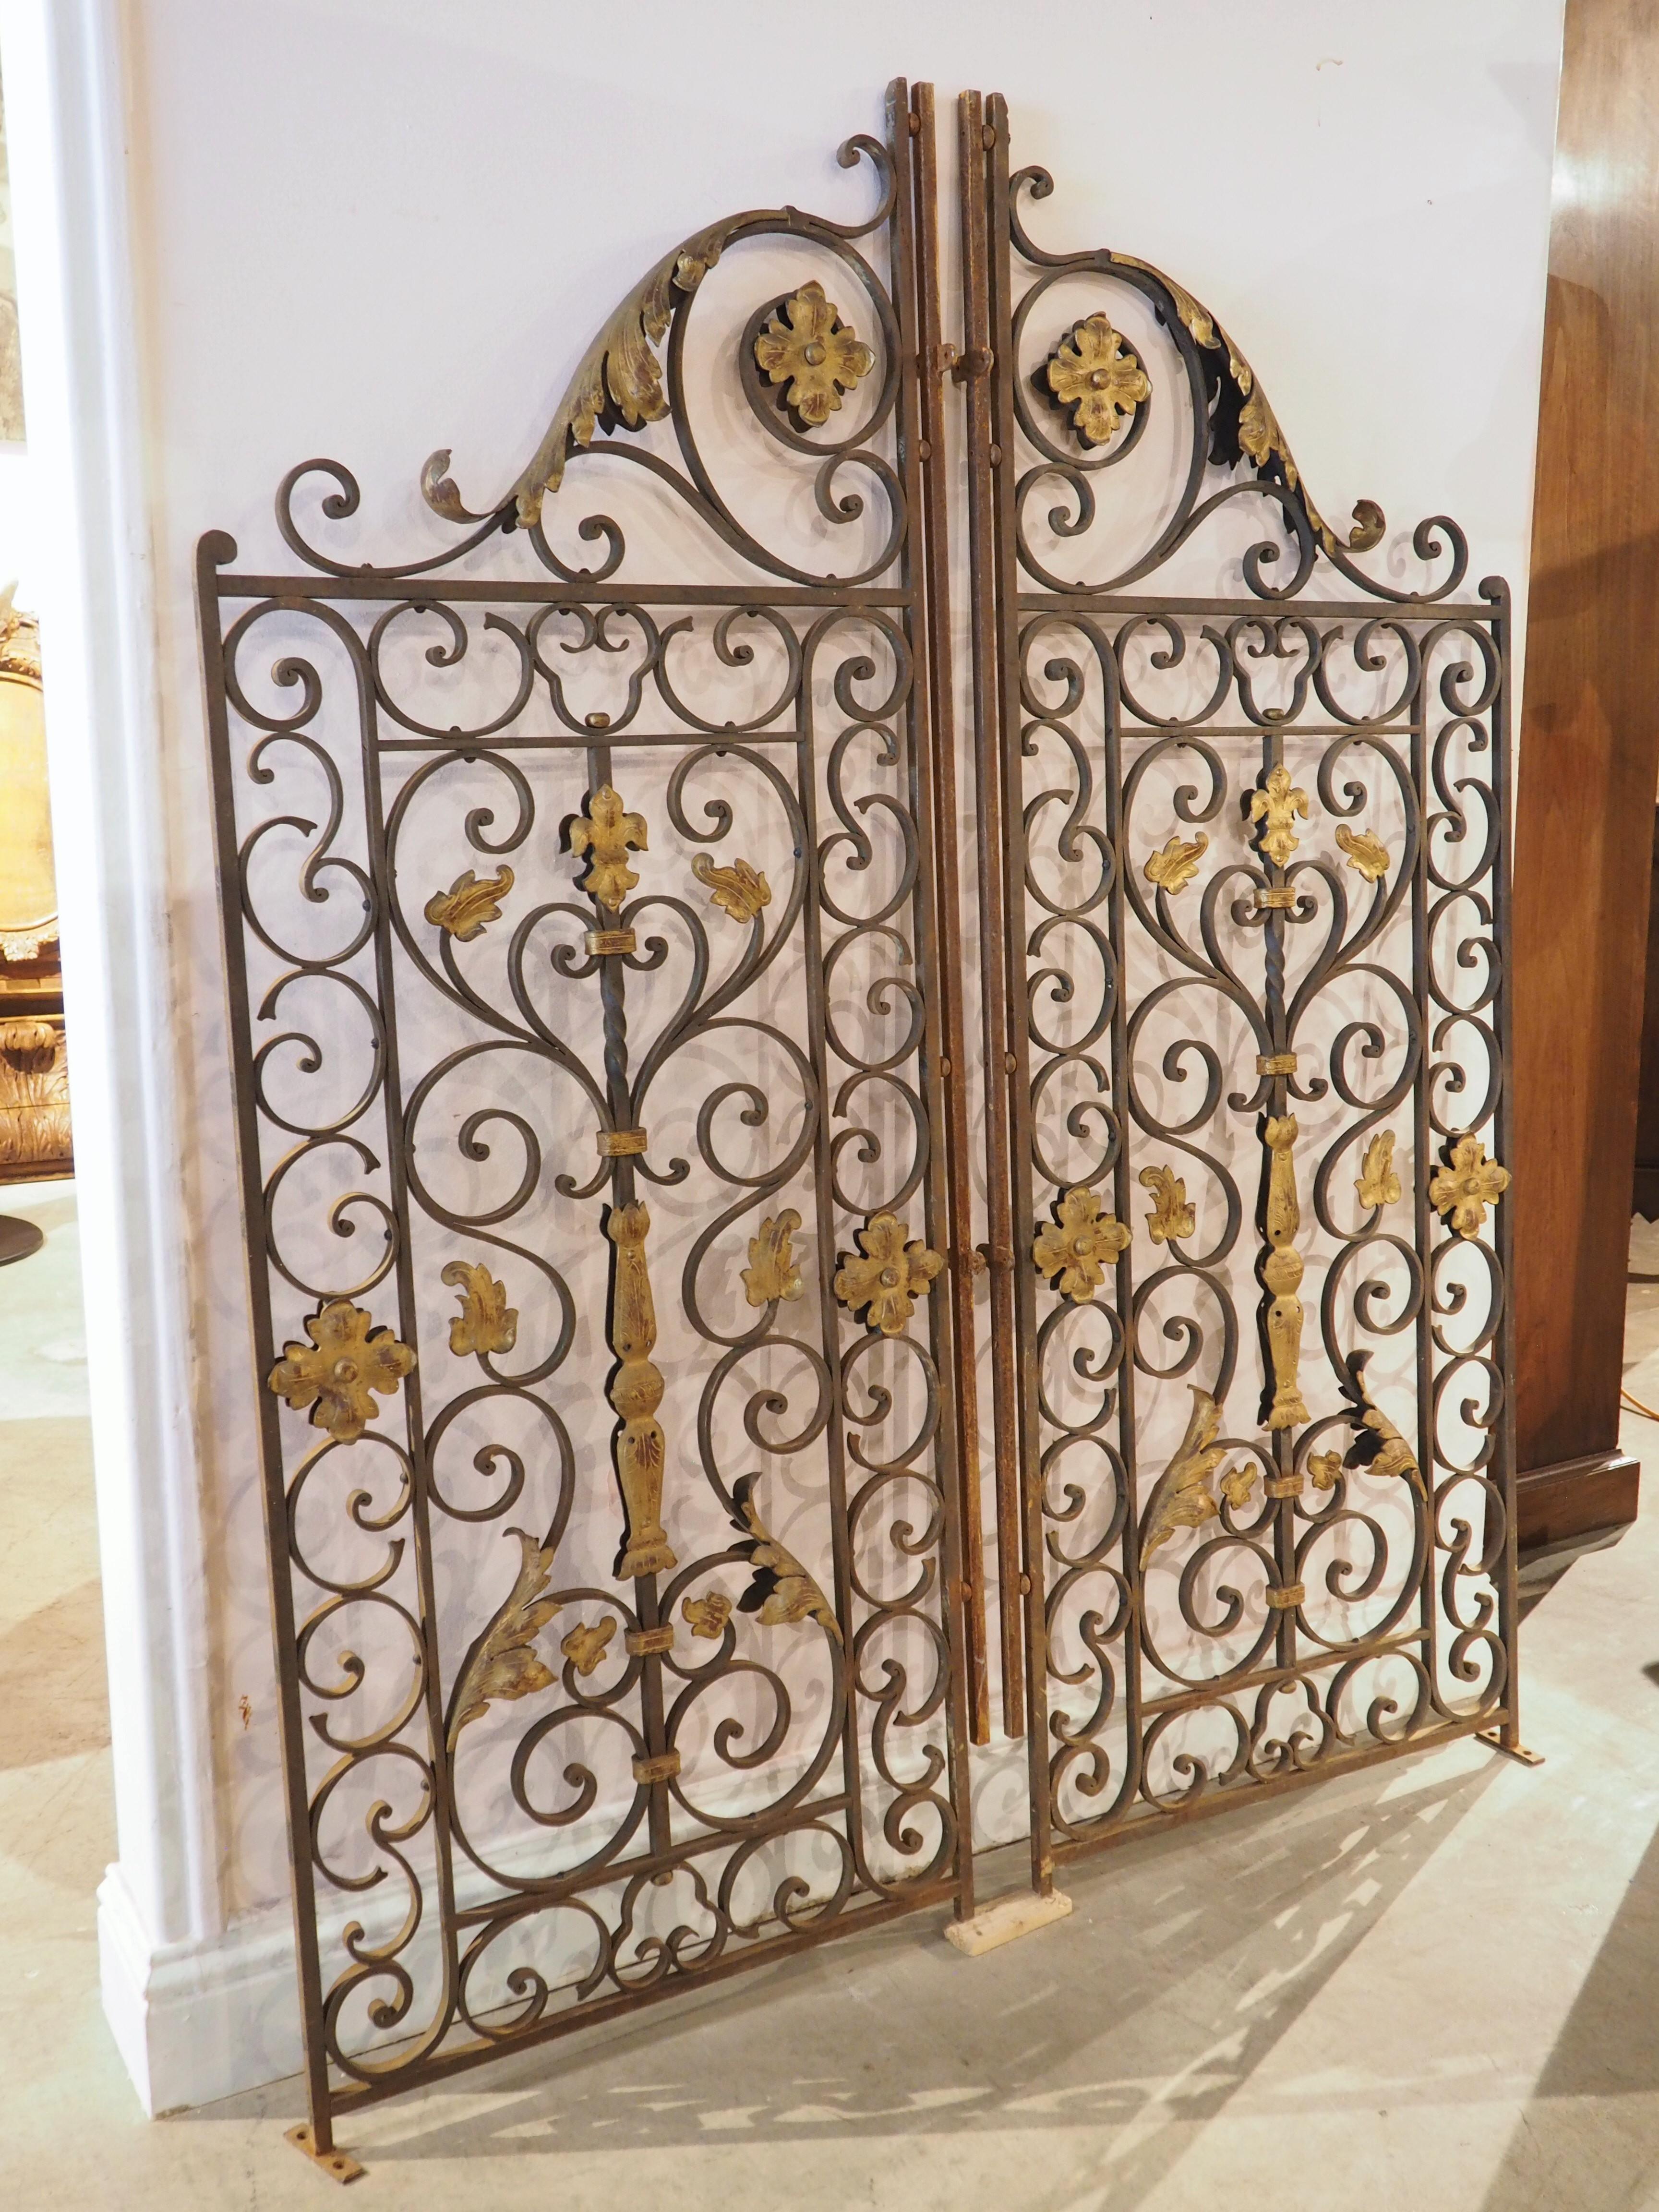 From France, circa 1870, this pair of wrought and gilt iron gates are full of energy and movement. The highly scrolled gates are comprised of an elaborate network of volutes and counter curves, arranged in a roughly rectangular fashion. The quality